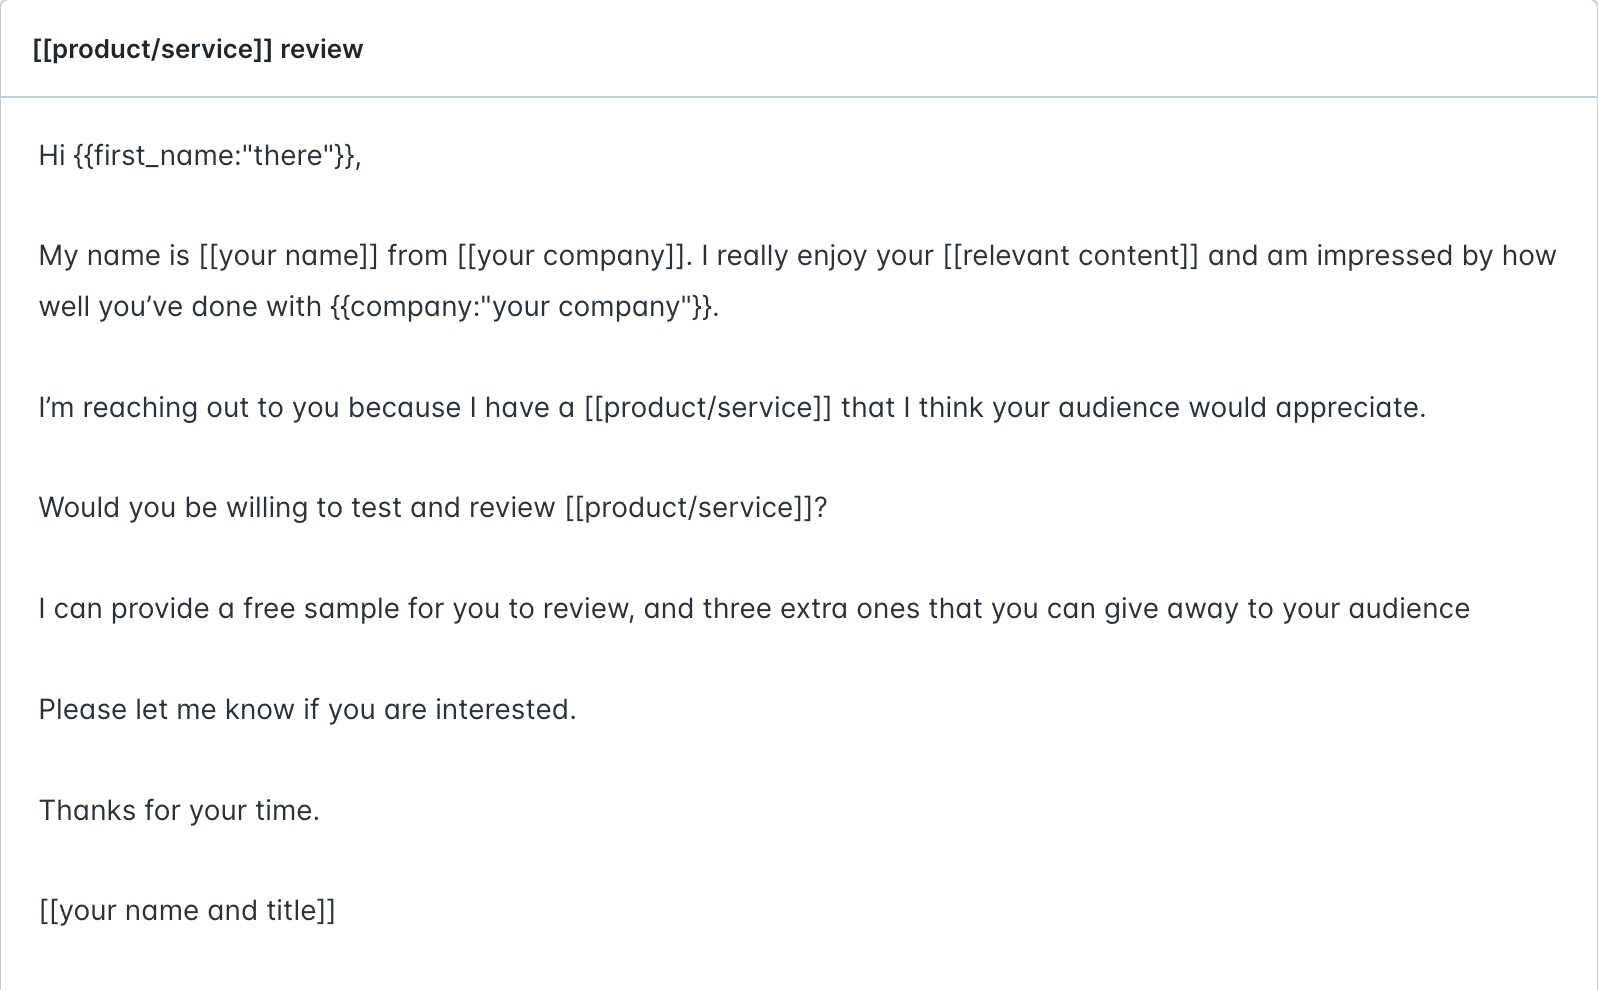 Product/service review_email